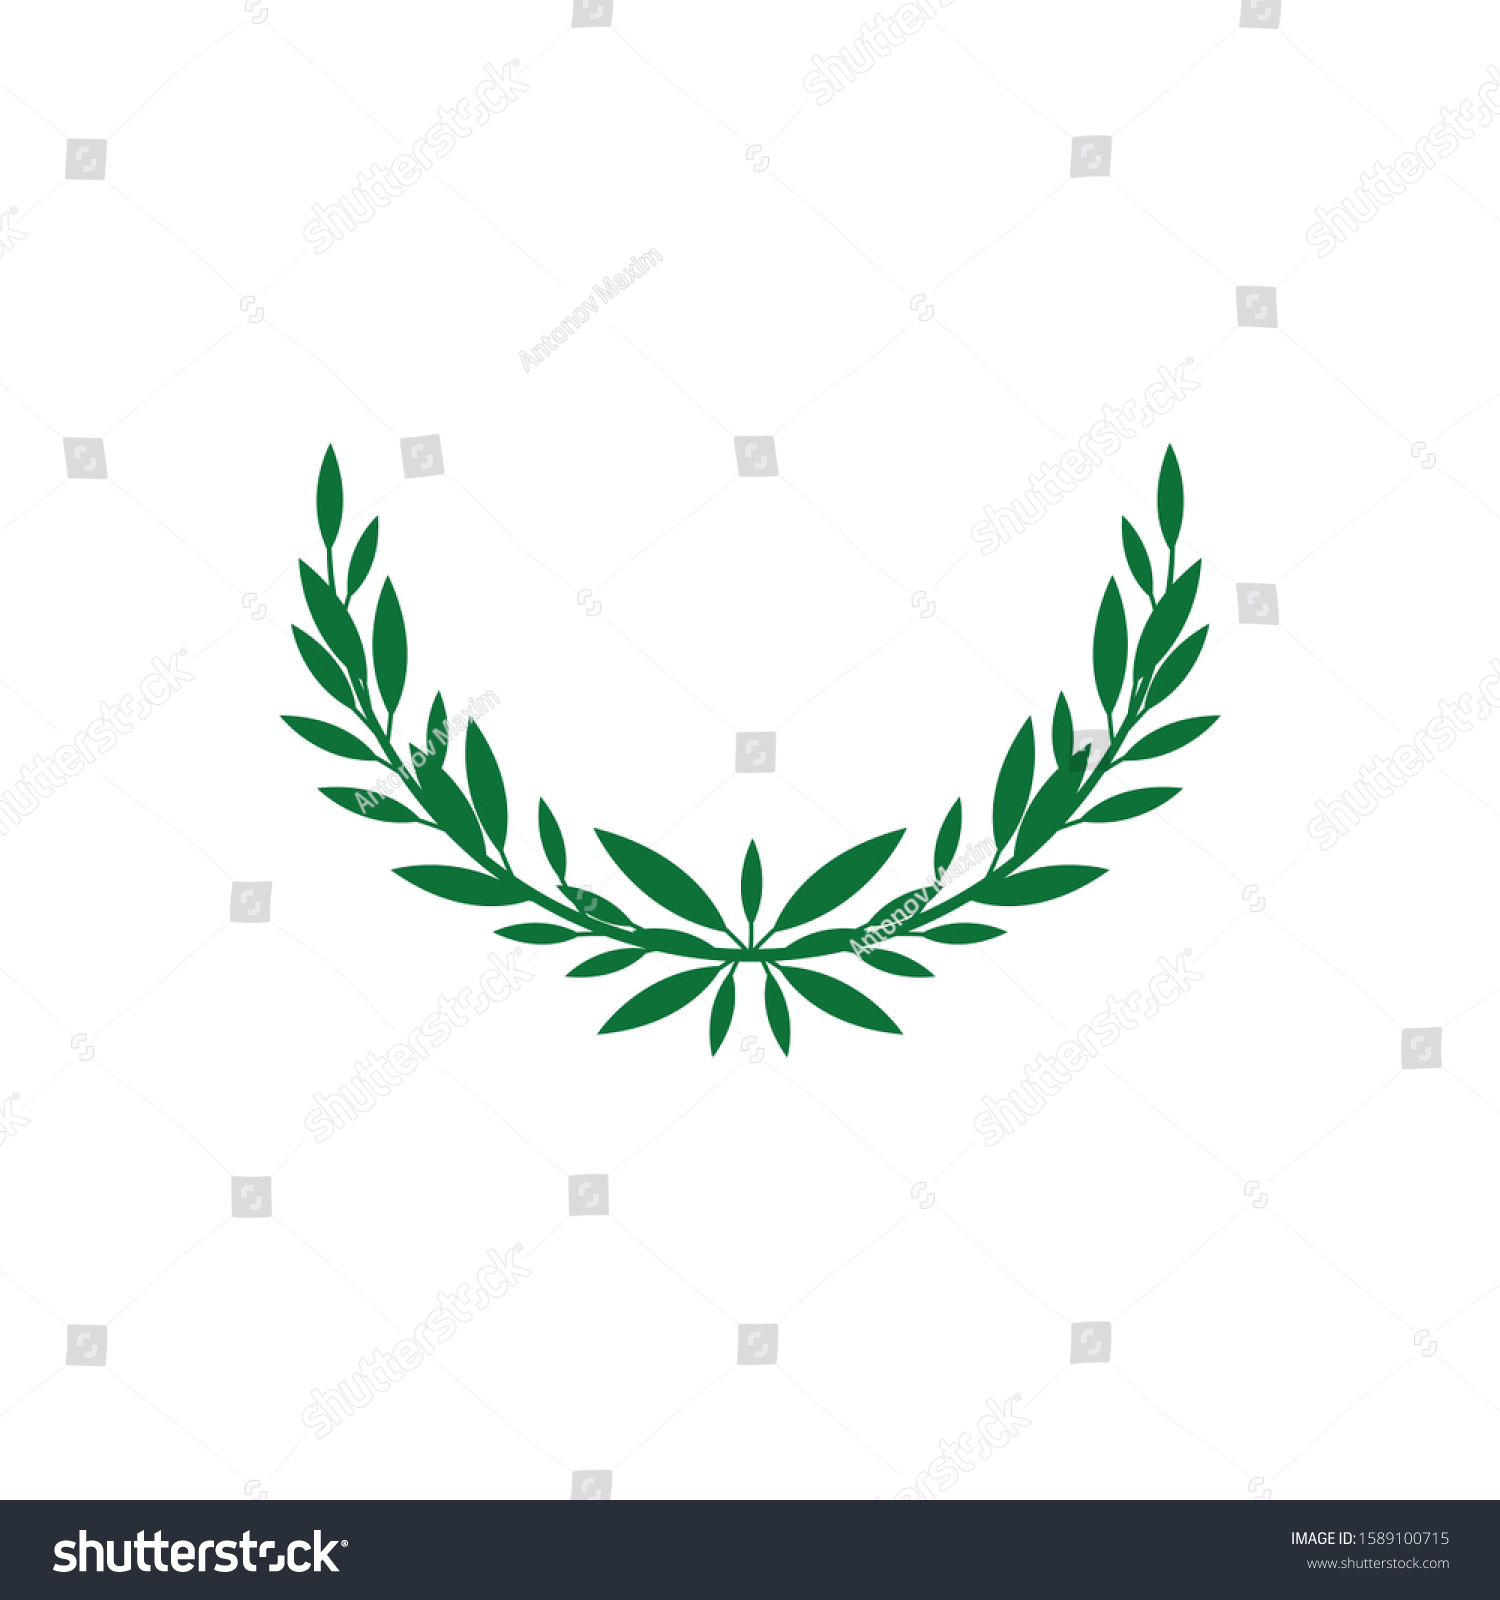 SVG of Green flat wreath icon with double branch silhouette with long leaves. Award laurel frame with half circle shape, ornate heraldic emblem isolated on white background, vector illustration. svg